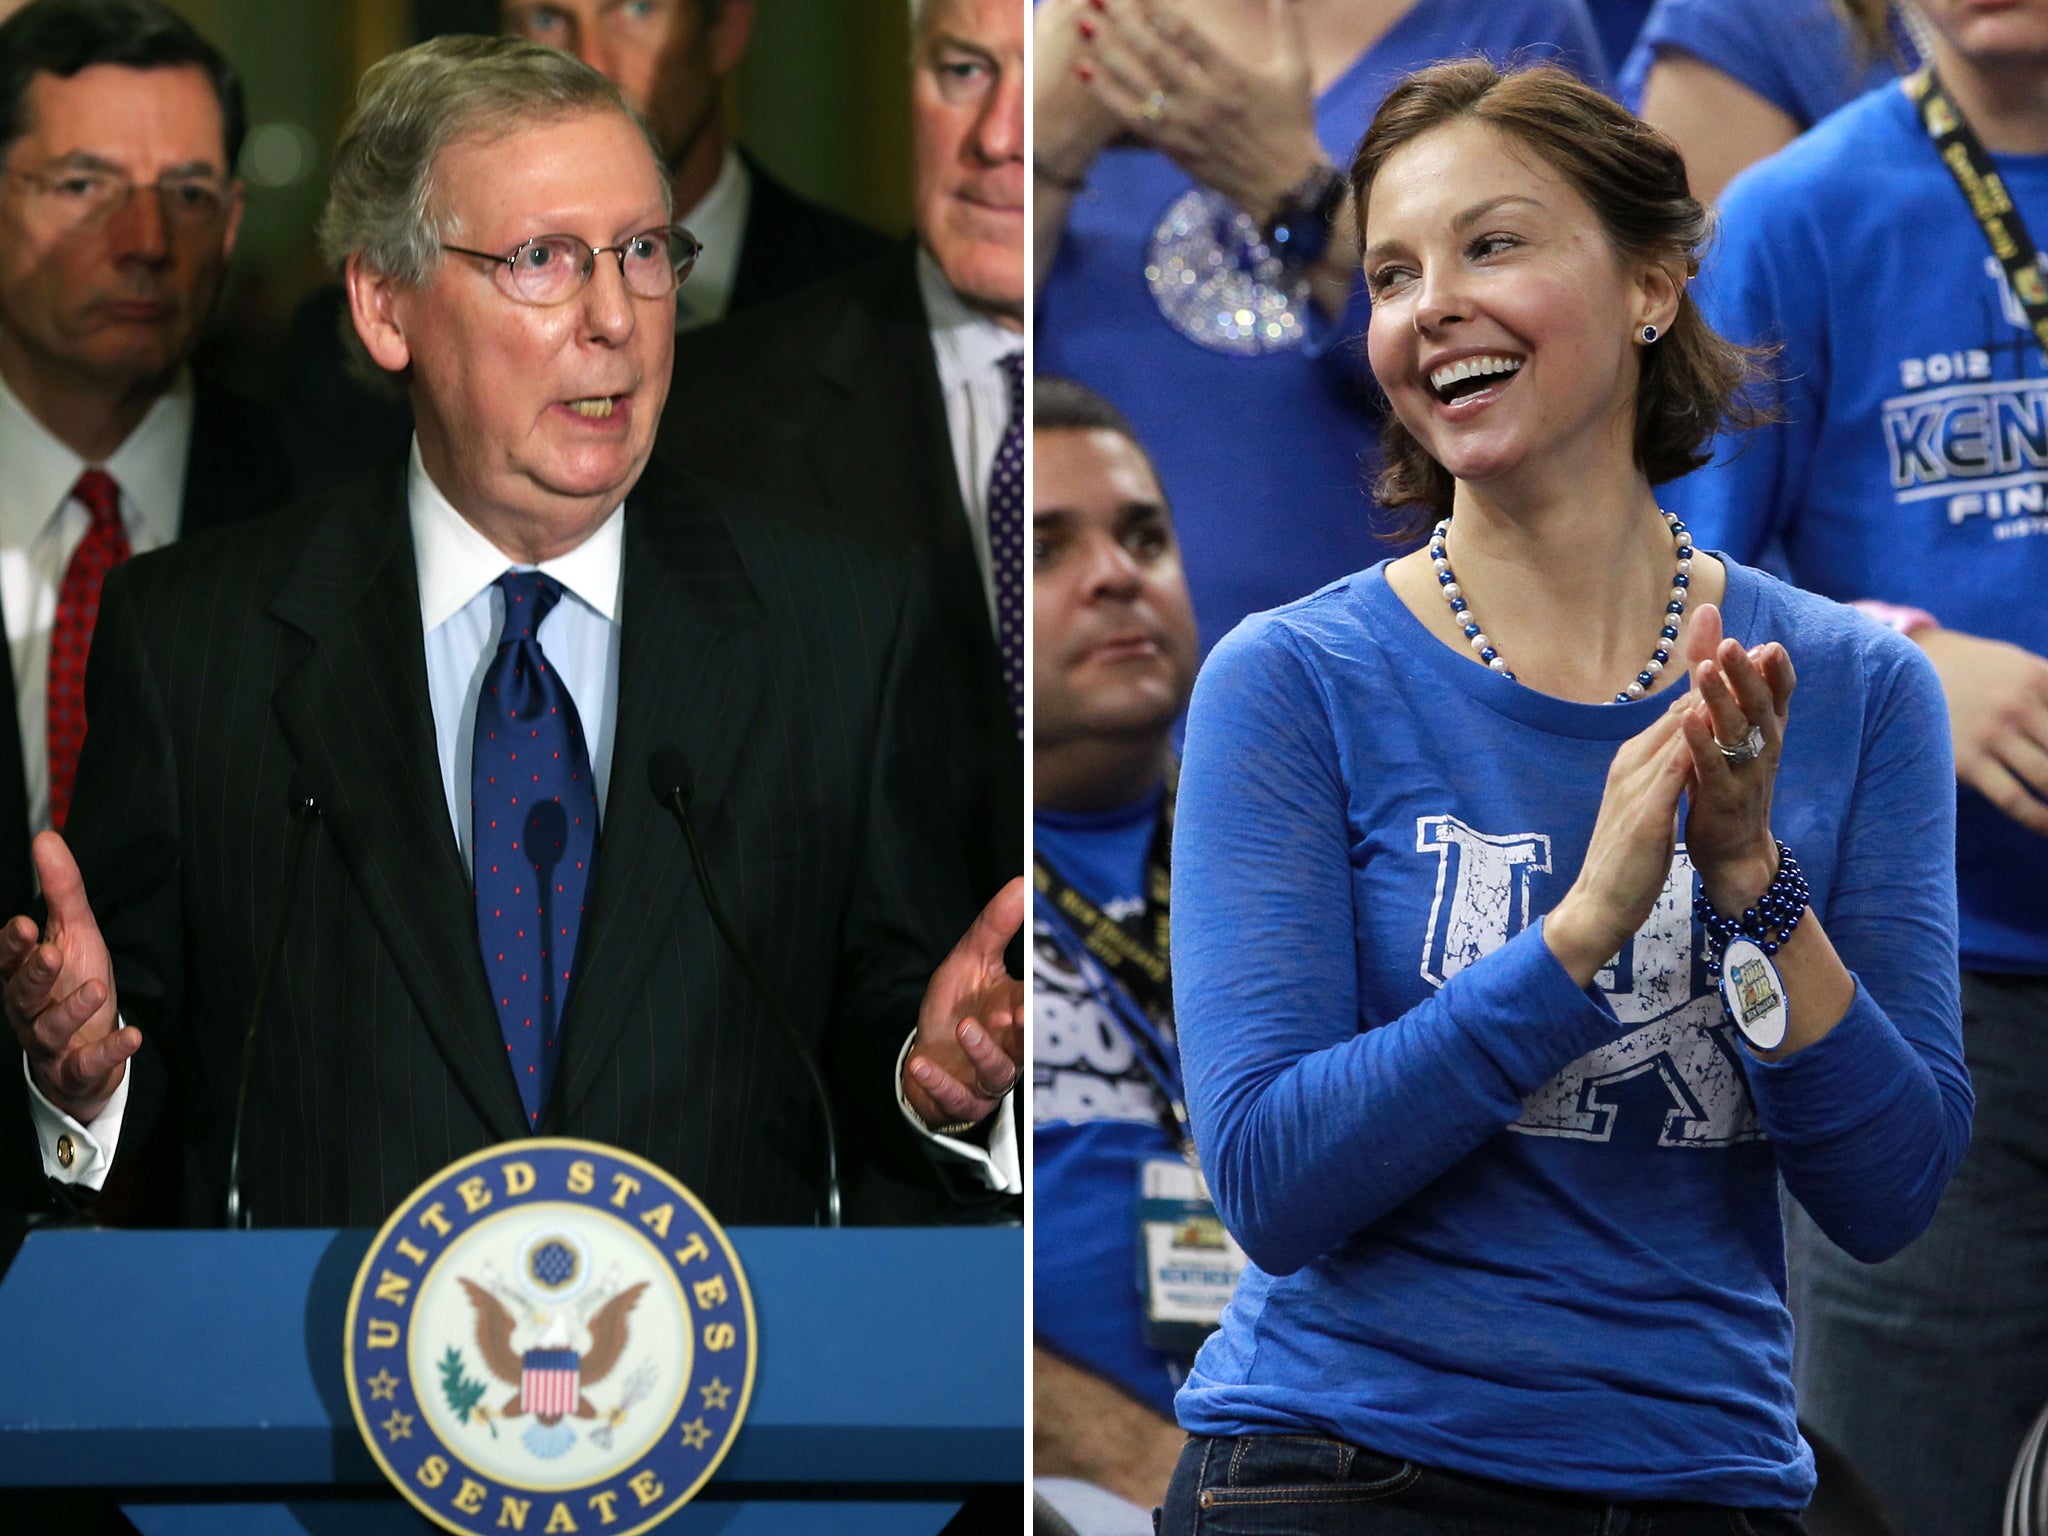 Mitch McConnell addressing the media yesterday and Ashley Judd at a Kentucky Wildcats game last month